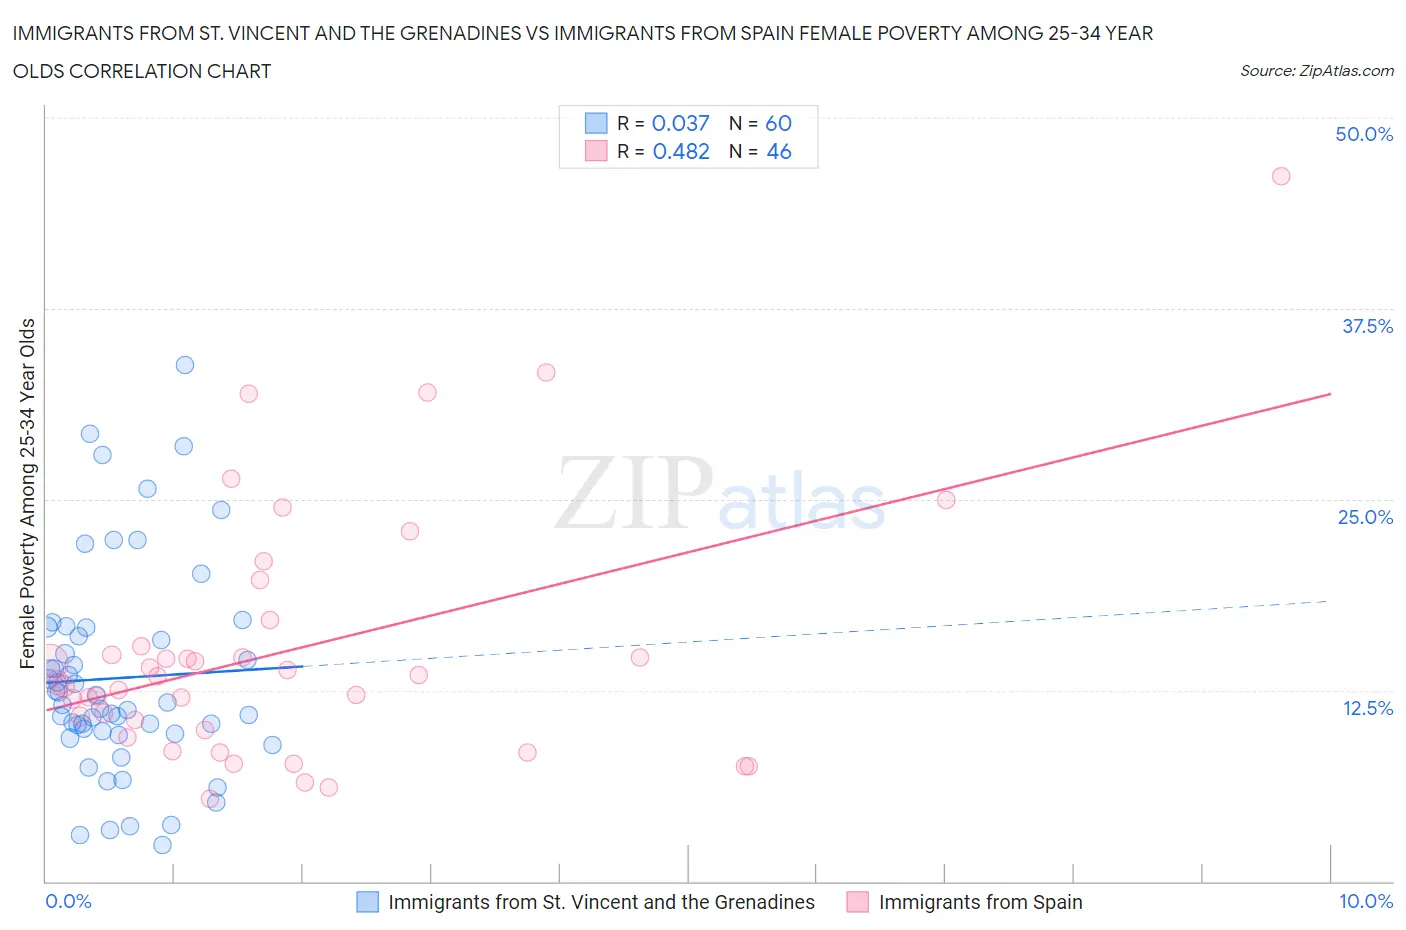 Immigrants from St. Vincent and the Grenadines vs Immigrants from Spain Female Poverty Among 25-34 Year Olds